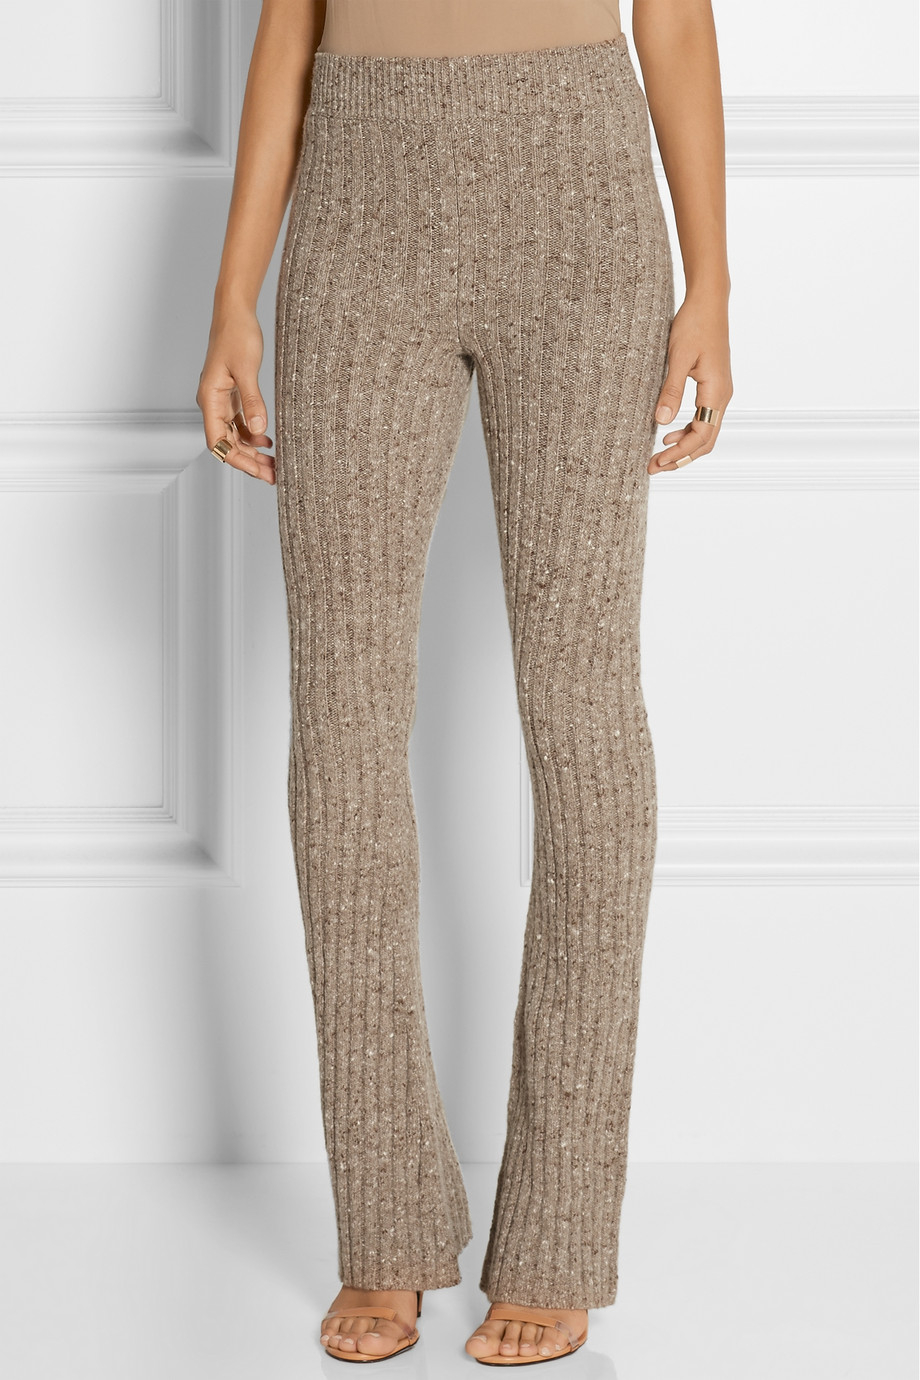 Marc Jacobs Ribbed-Knit Cashmere Flared Pants in Brown - Lyst